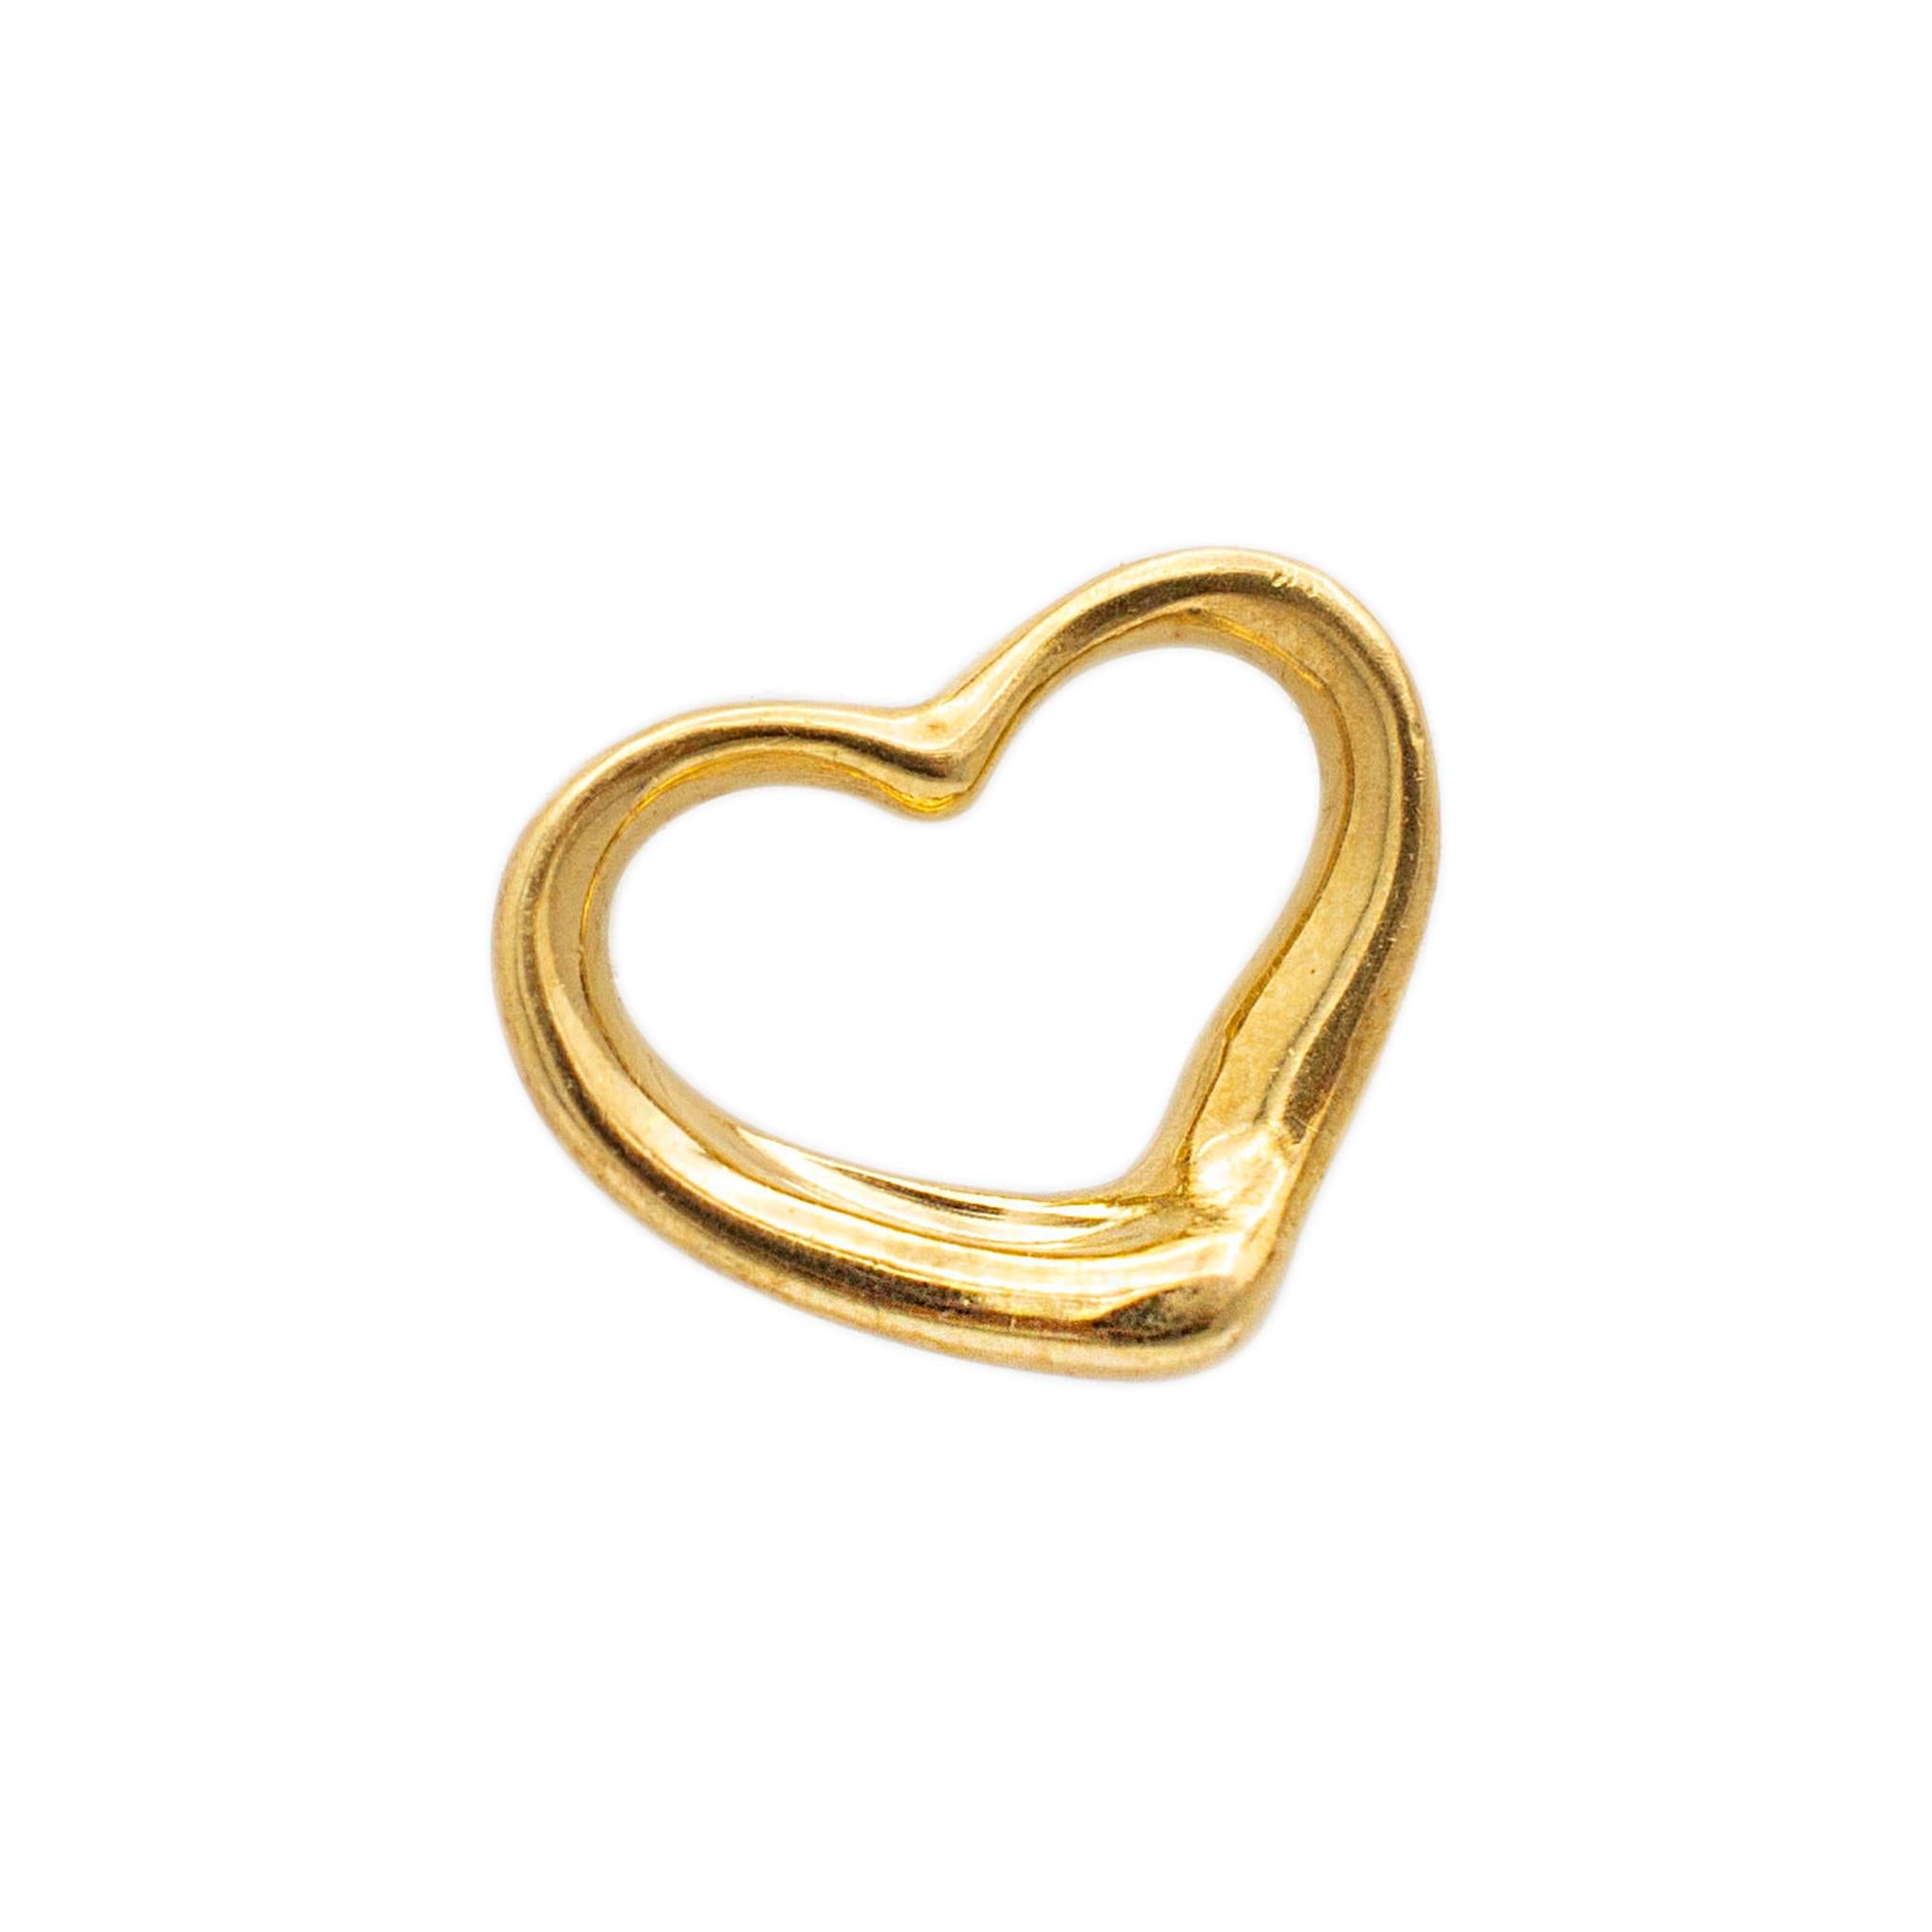 Gender: Ladies

Metal Type: 18K Yellow Gold

Length: 0.50 Inches

Width: 14.70 mm

Weight: 1.56 grams

Ladies 18K yellow gold symbol vintage heart-shaped pendant. Engraved with 